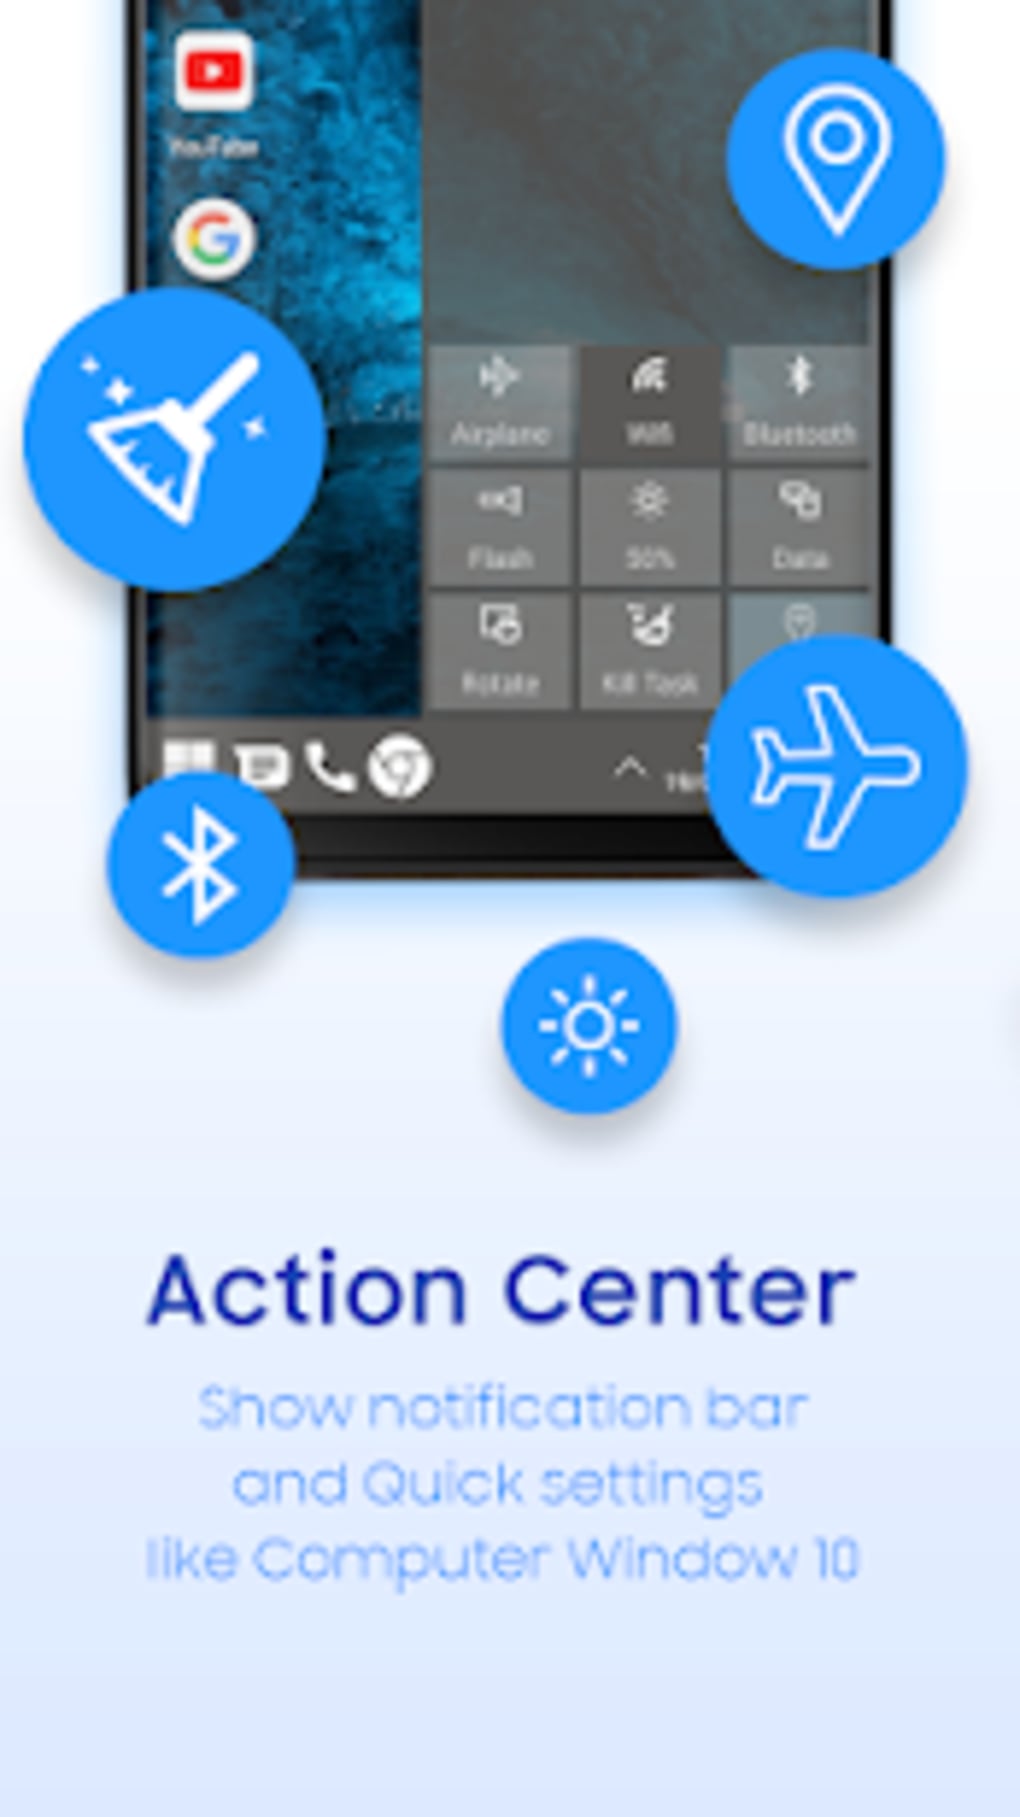 windows 10 computer launcher for android screenshot